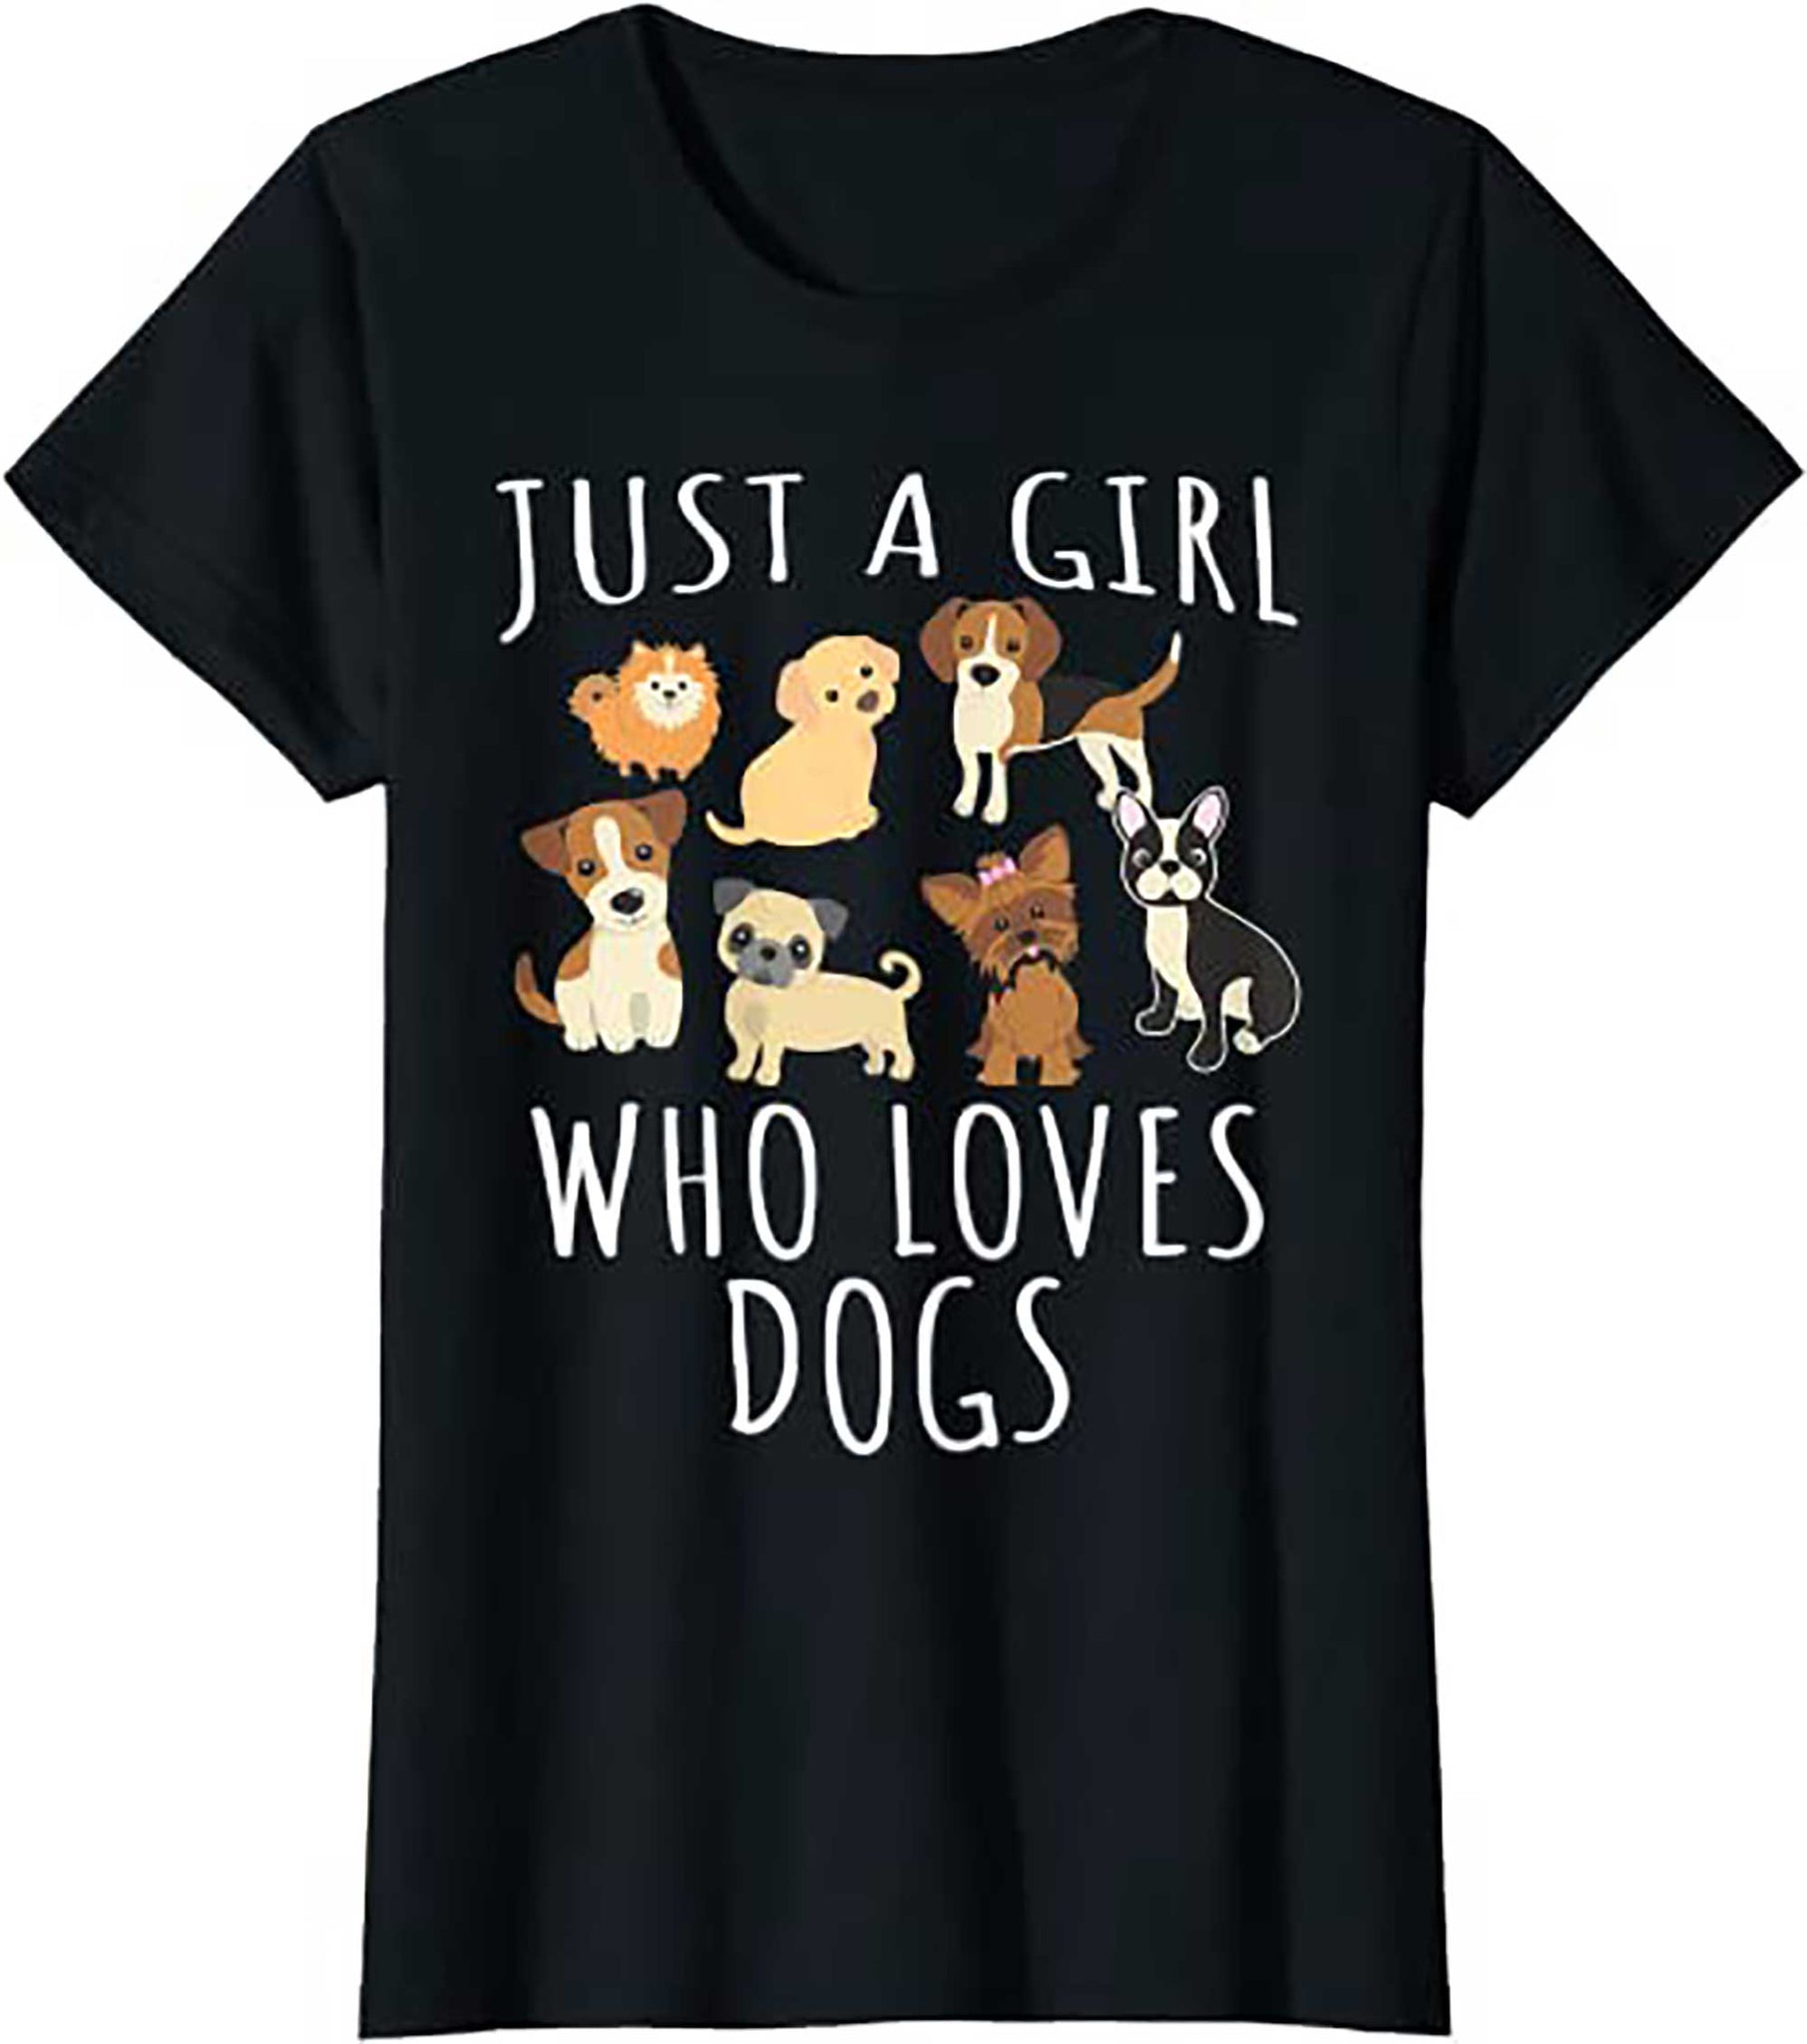 Just a girl who loves Dogs-Funny Puppy T Shirt